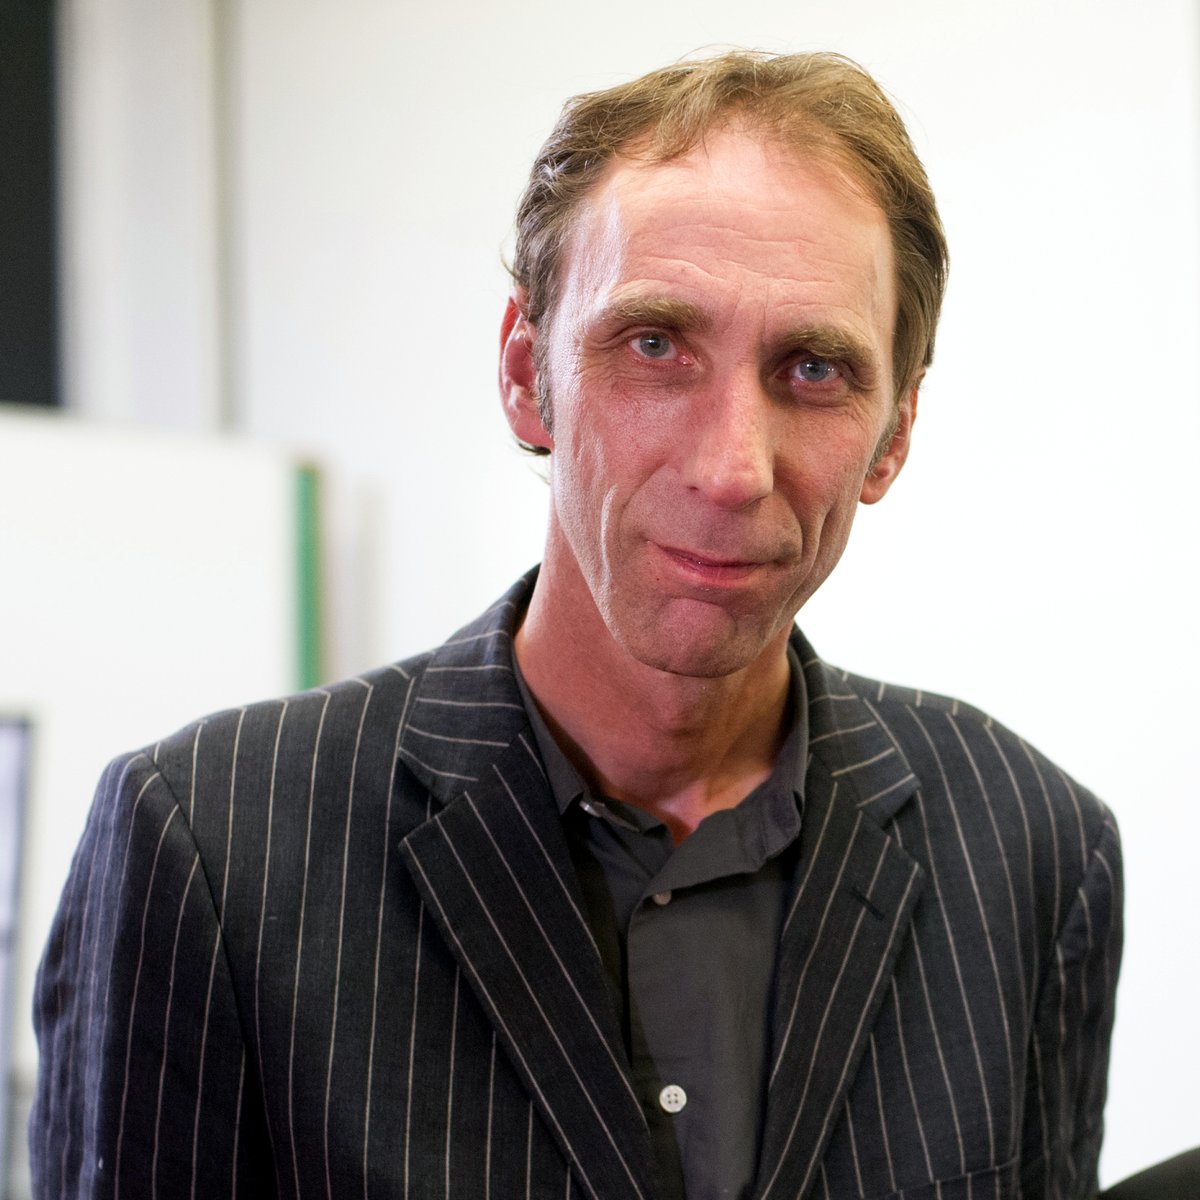 29. Will Self Self is a contributor to the BBC Radio 4 programme A Point of View, to which he contributes radio essays. In 2013, Self took part in discussions about becoming the inaugural BBC Radio 4 Writer-in-Residence, but later withdrew.